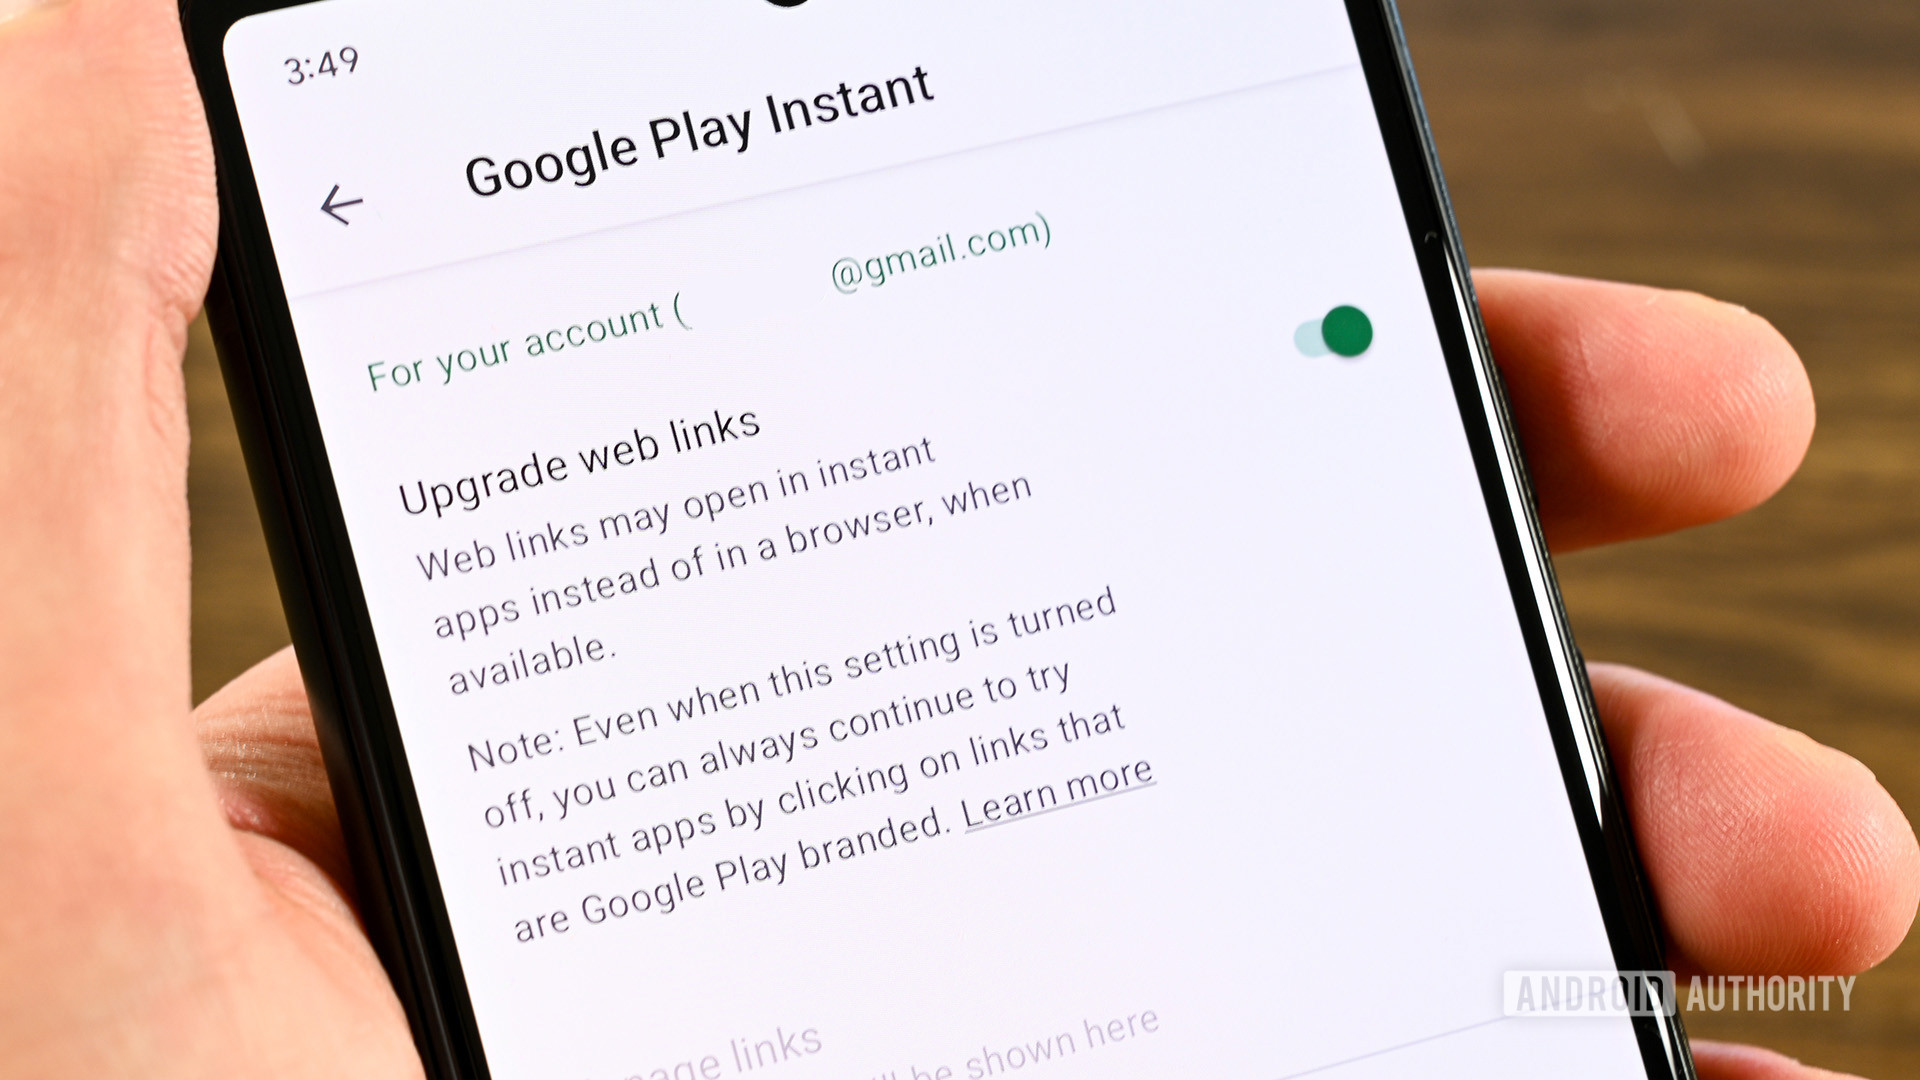 Google Play Instant Apps